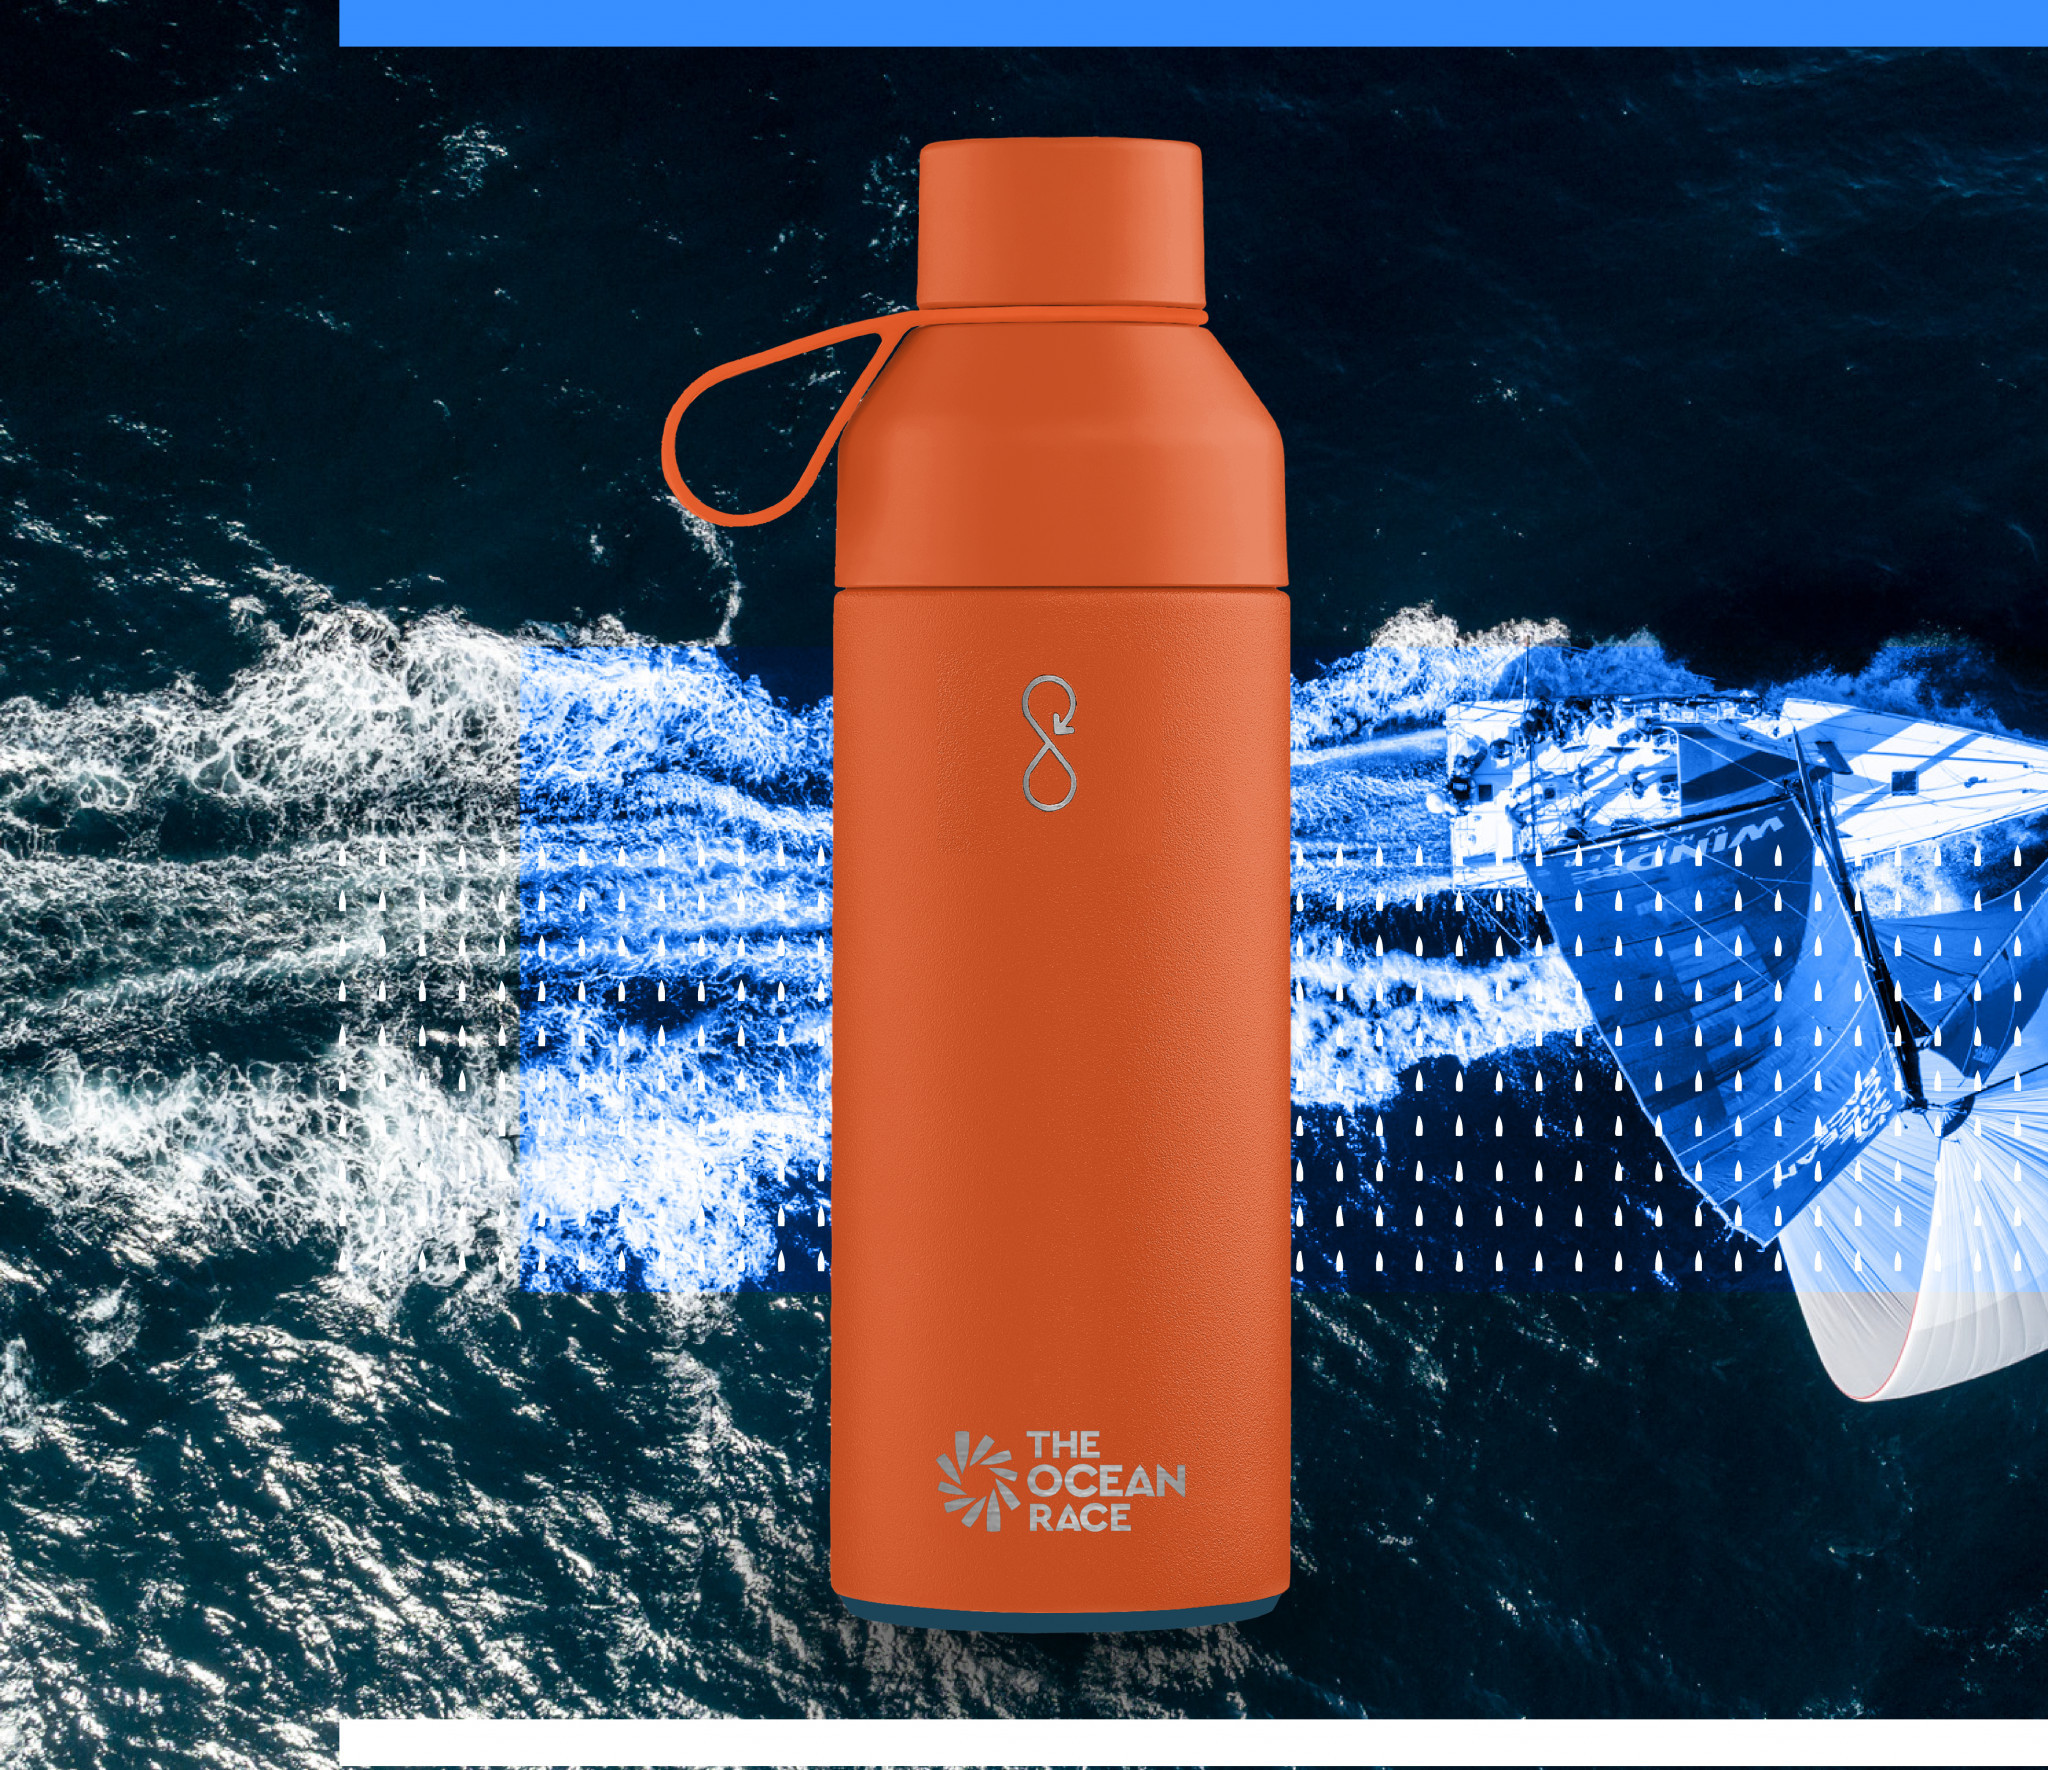 A special edition Ocean Bottle is set to be released to mark the Ocean Race ©The Ocean Race 